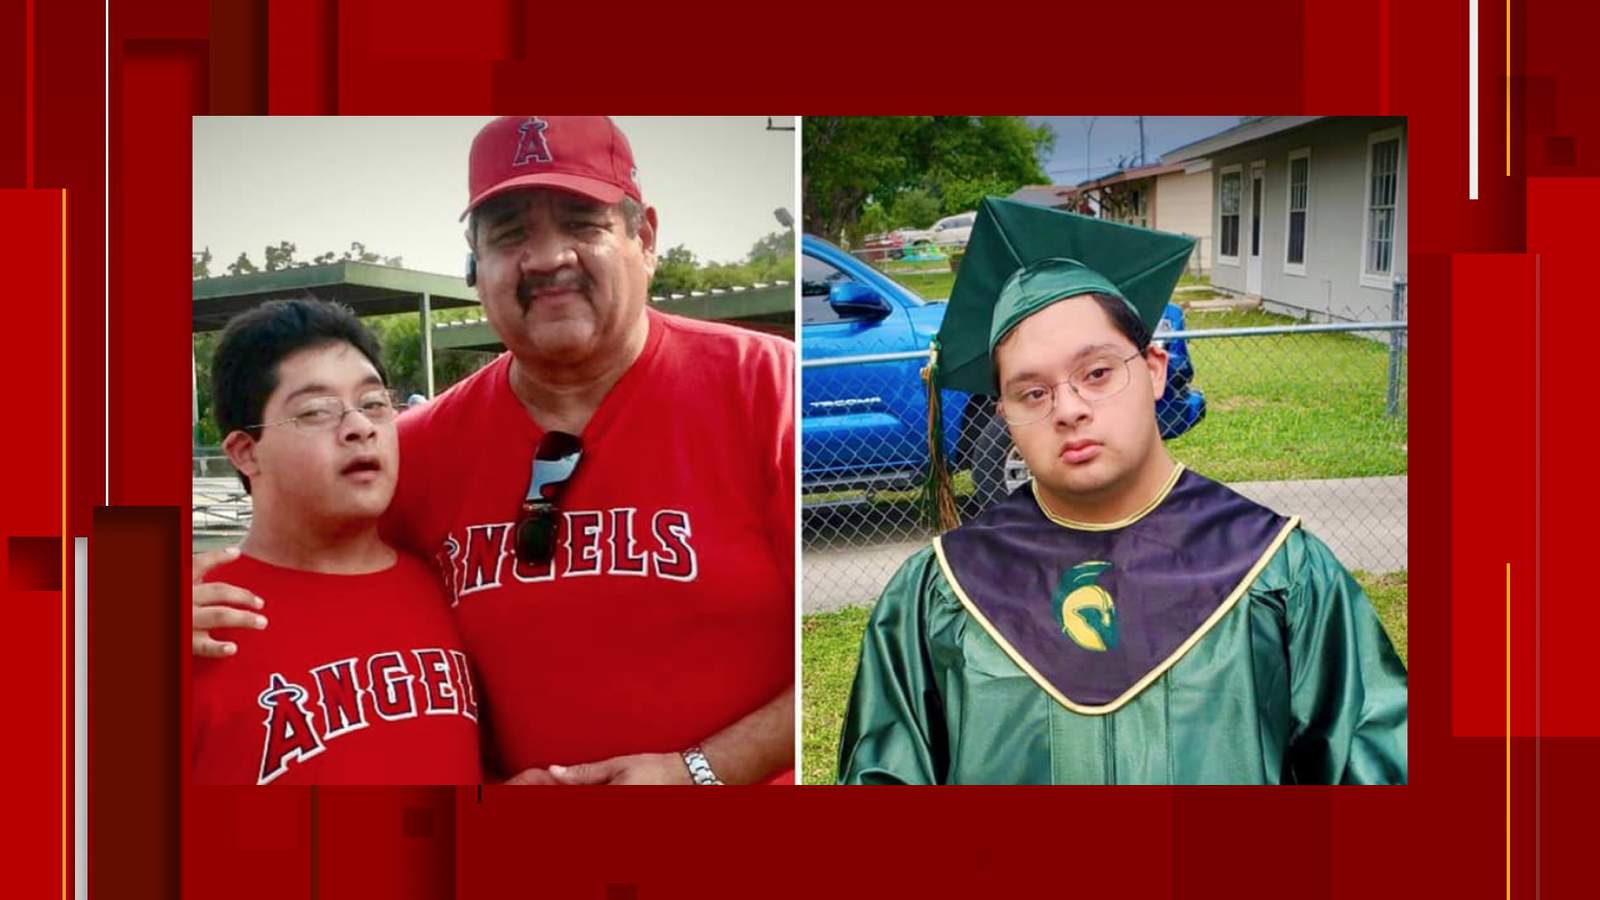 17-year-old team member of the Miracle League of San Antonio loses battle with COVID-19